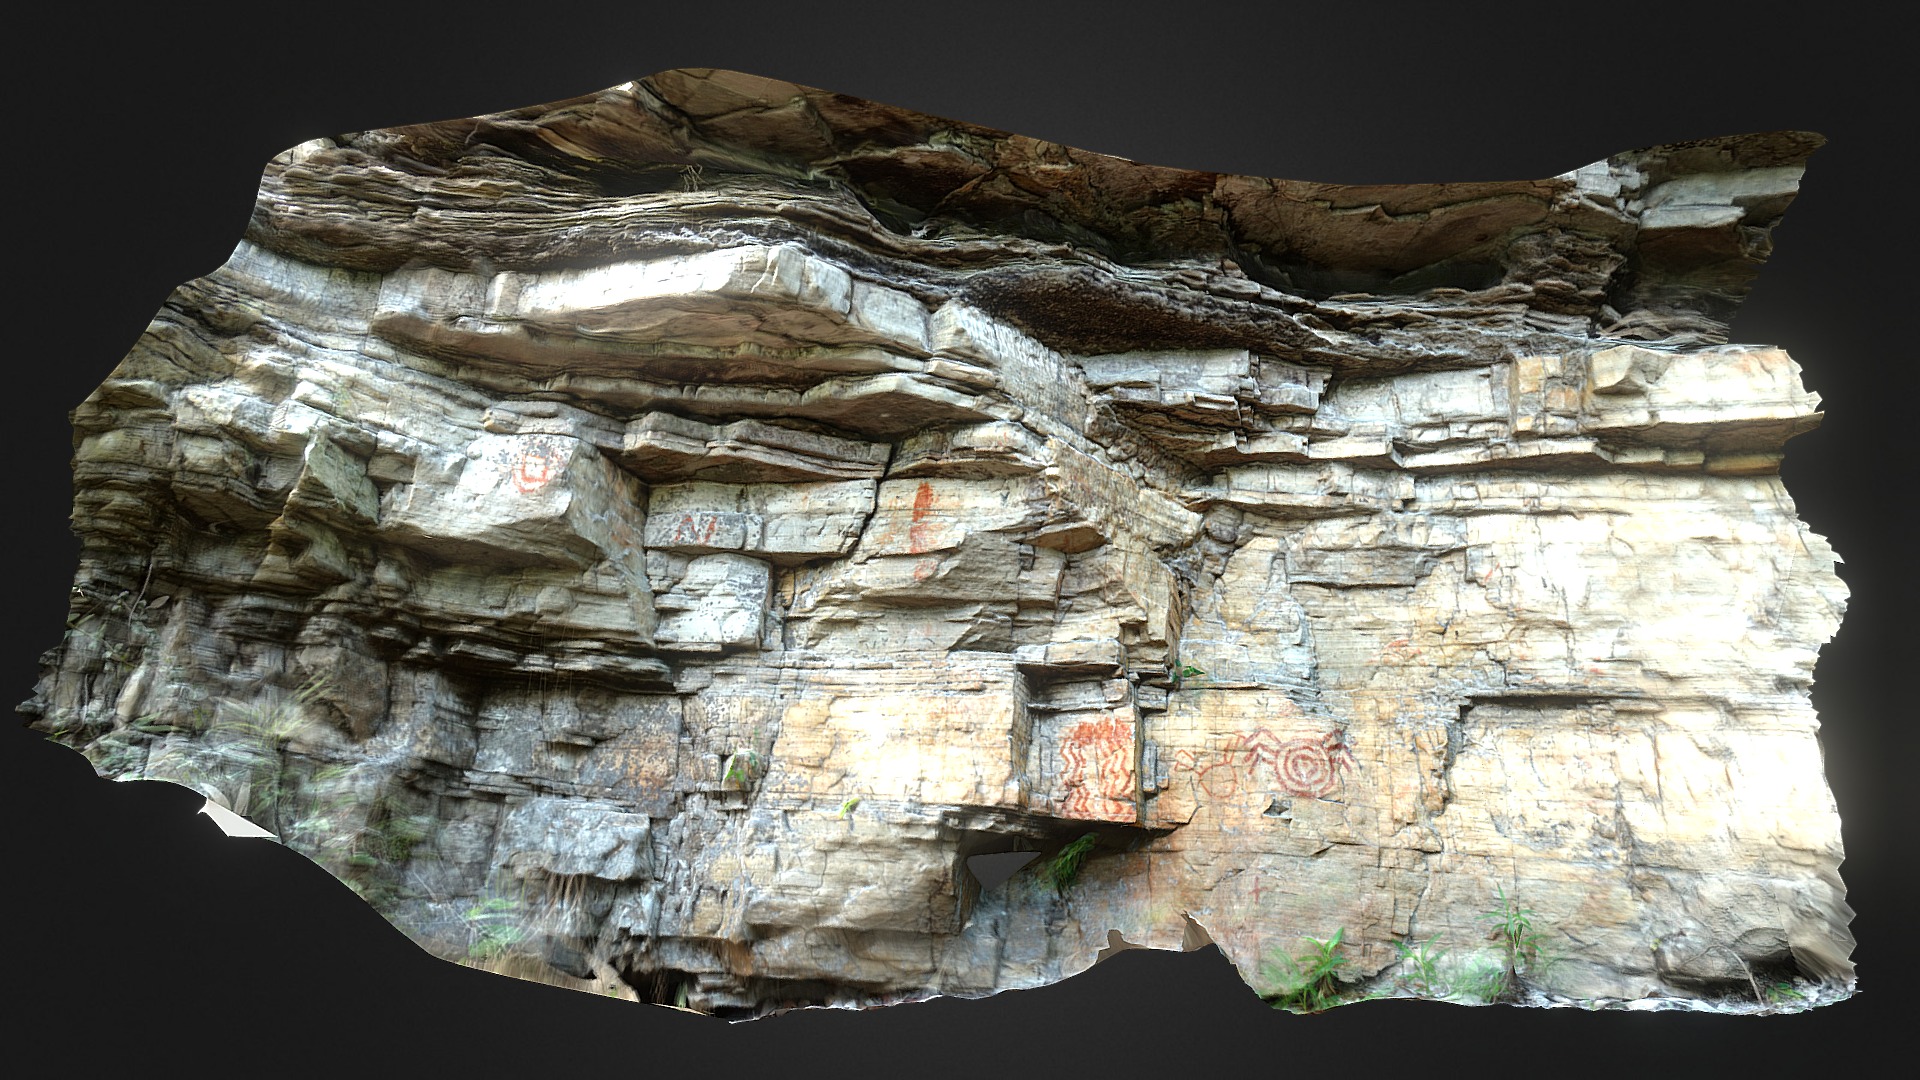 3D model Sítio Arqueológico Lapa da Zilda - This is a 3D model of the Sítio Arqueológico Lapa da Zilda. The 3D model is about a rock formation with a hole in it.